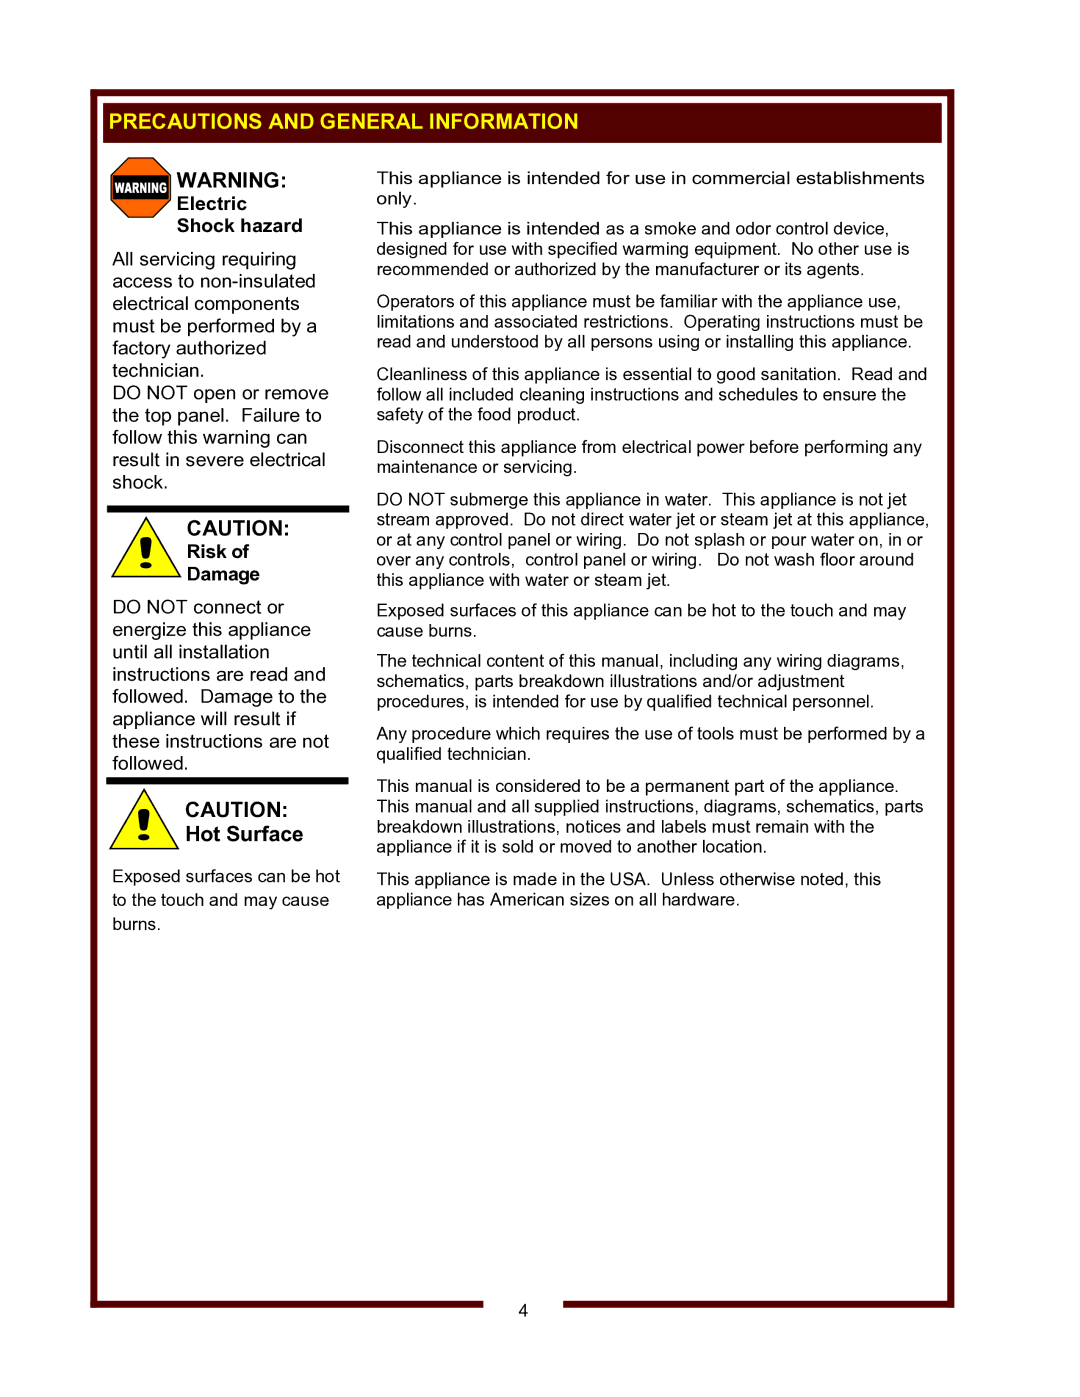 Wells WVSW owner manual Precautions and General Information, Hot Surface 